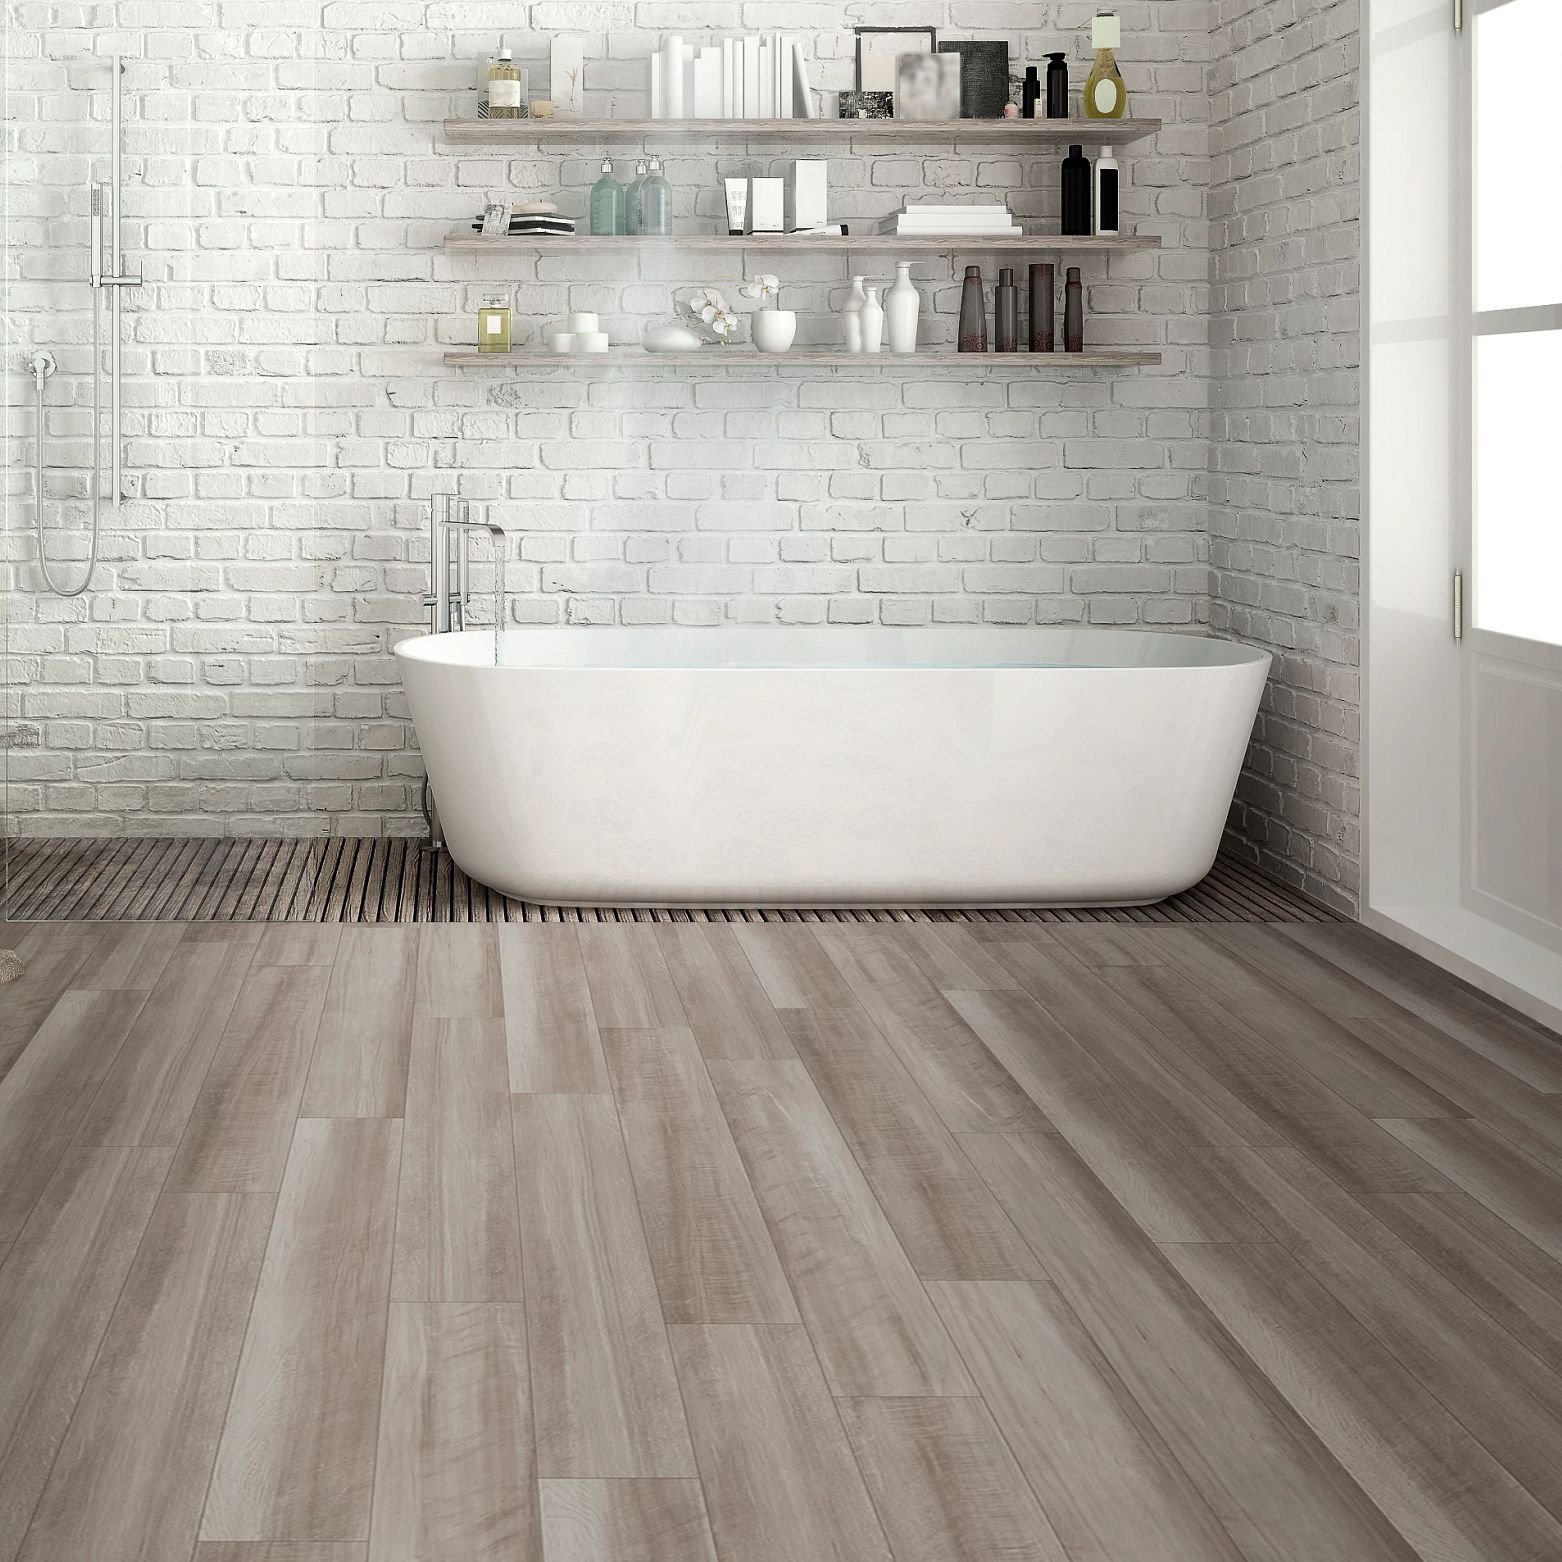 Vinyl Flooring for bathrooms at Zinz Design and Selection Center Inc in Austintown, OH